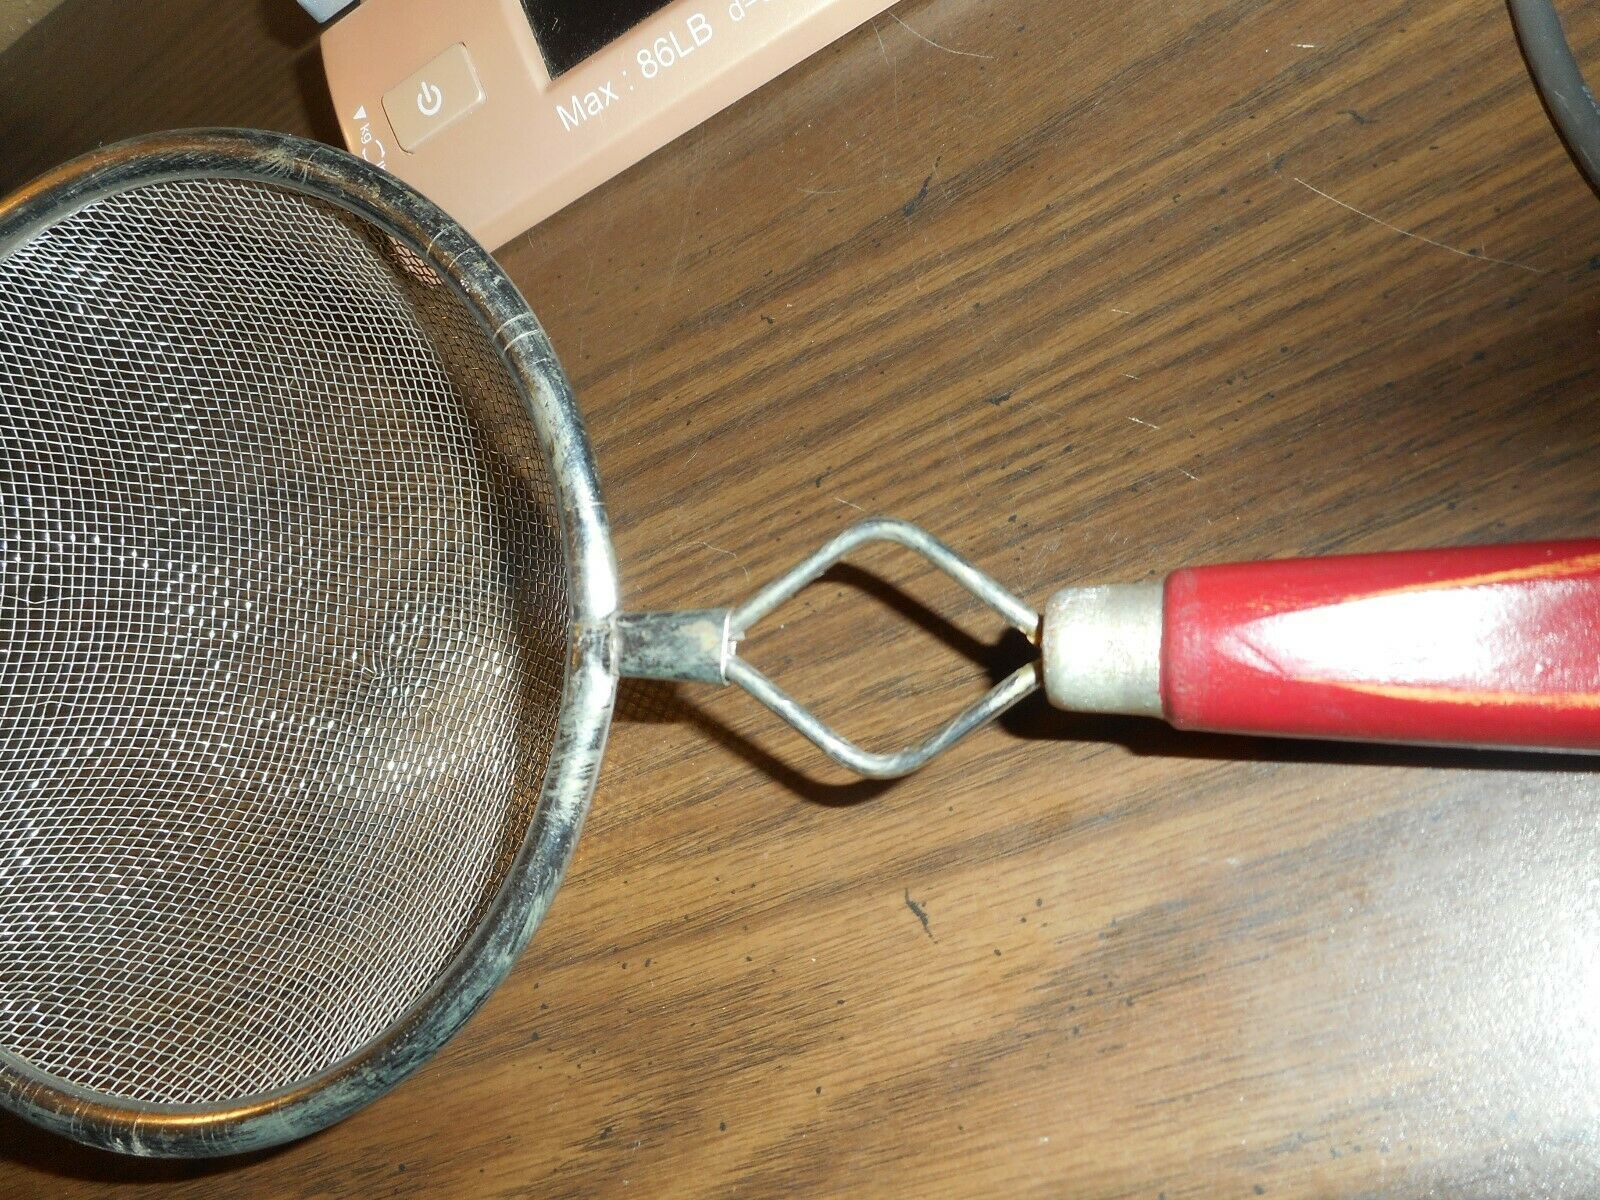 Vintage Androck Egg Beater Manual Hand Mixer Red Wooden Handles